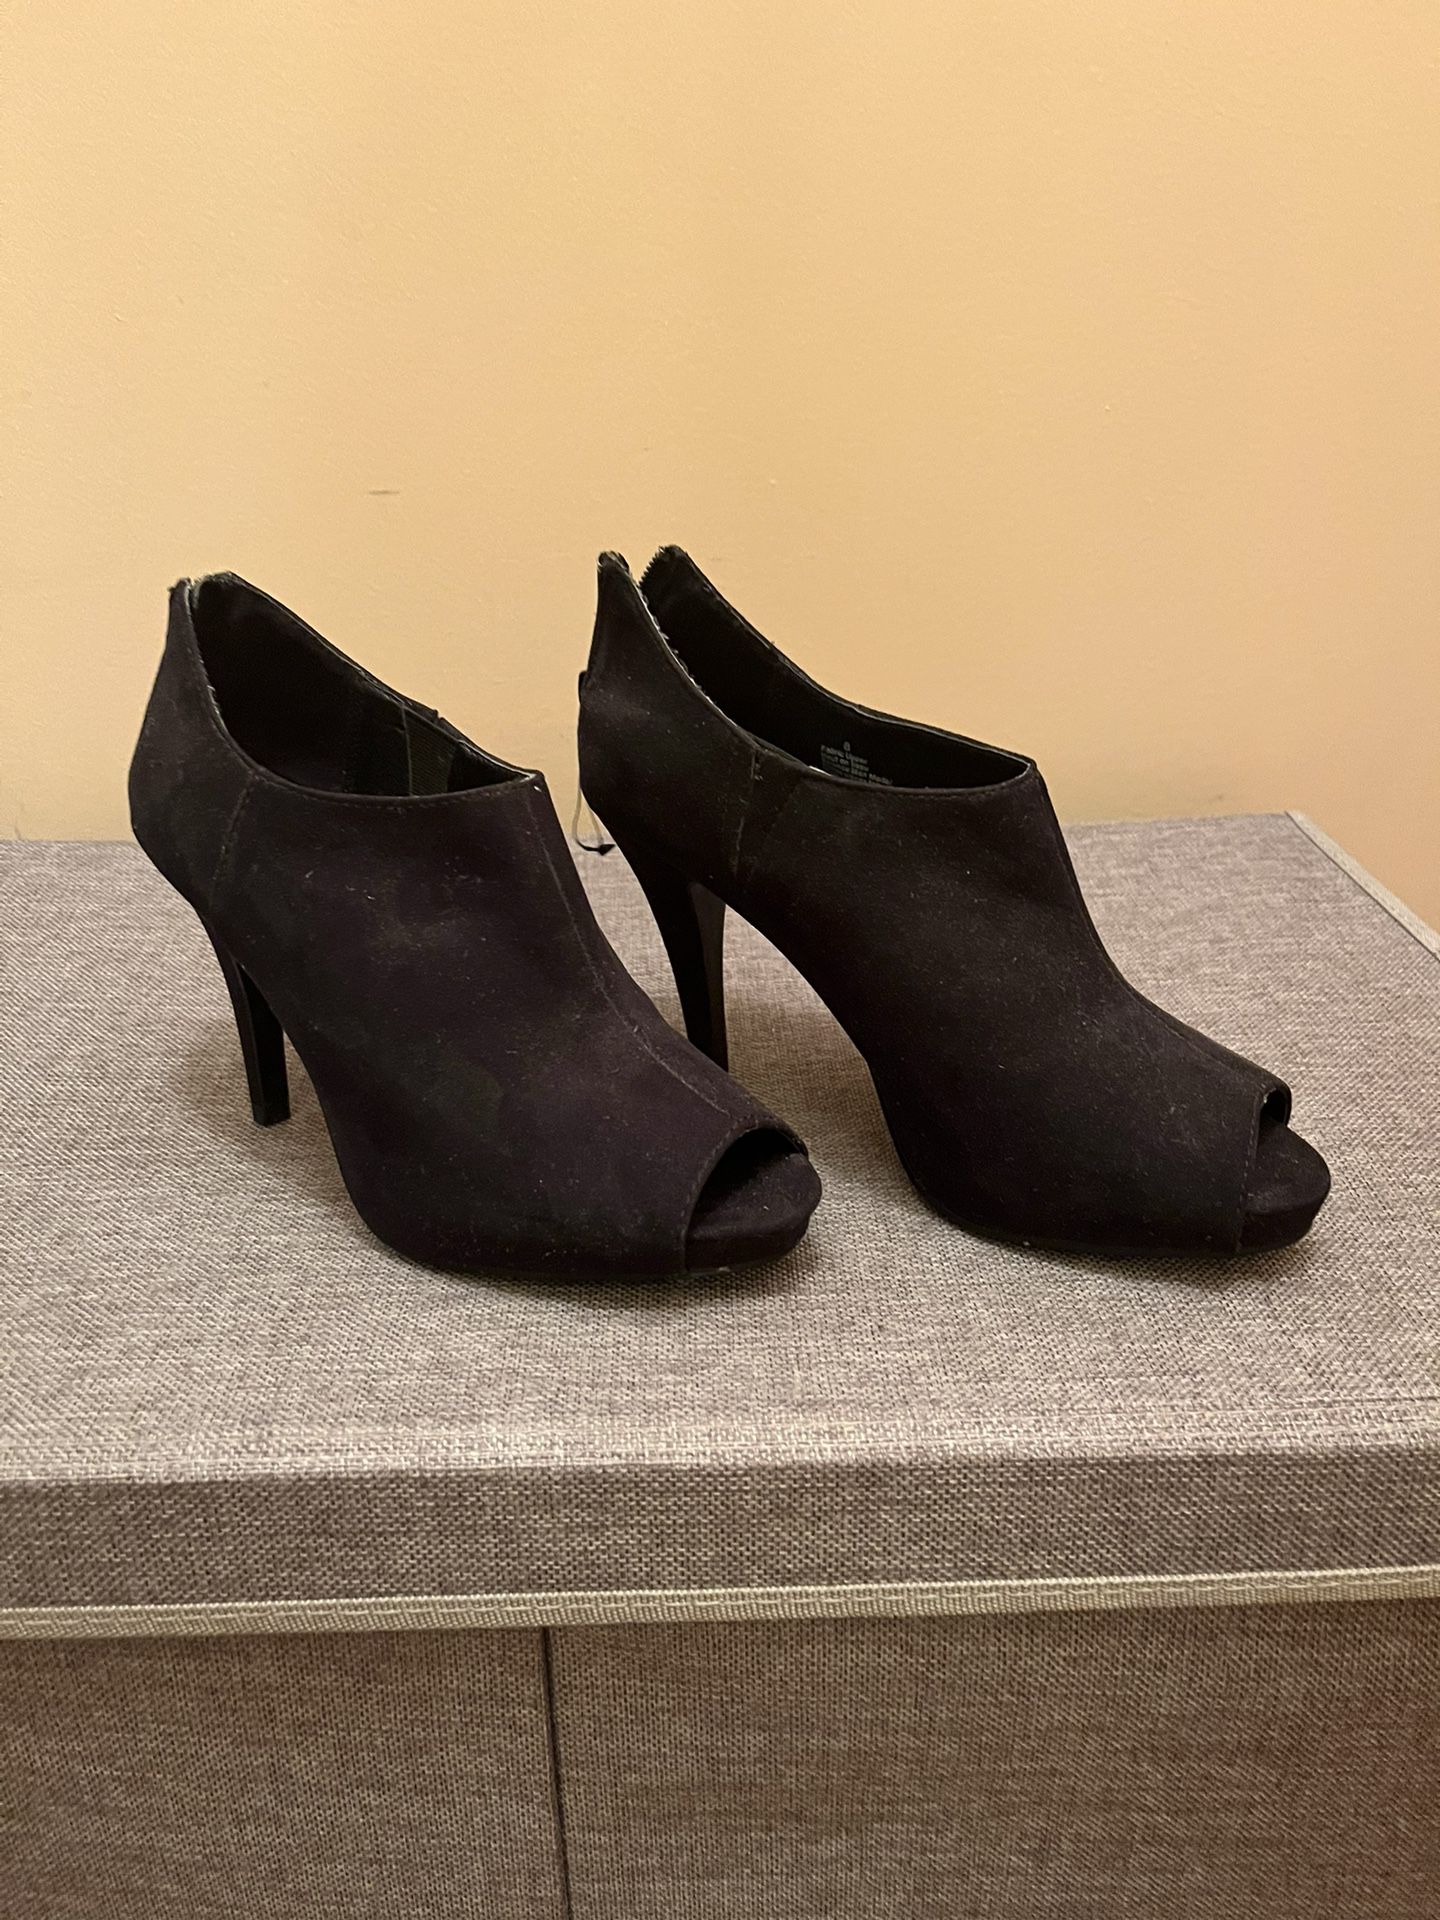 New. Express open toes heels. With zippers on the back  Suede material. Color black size 8 